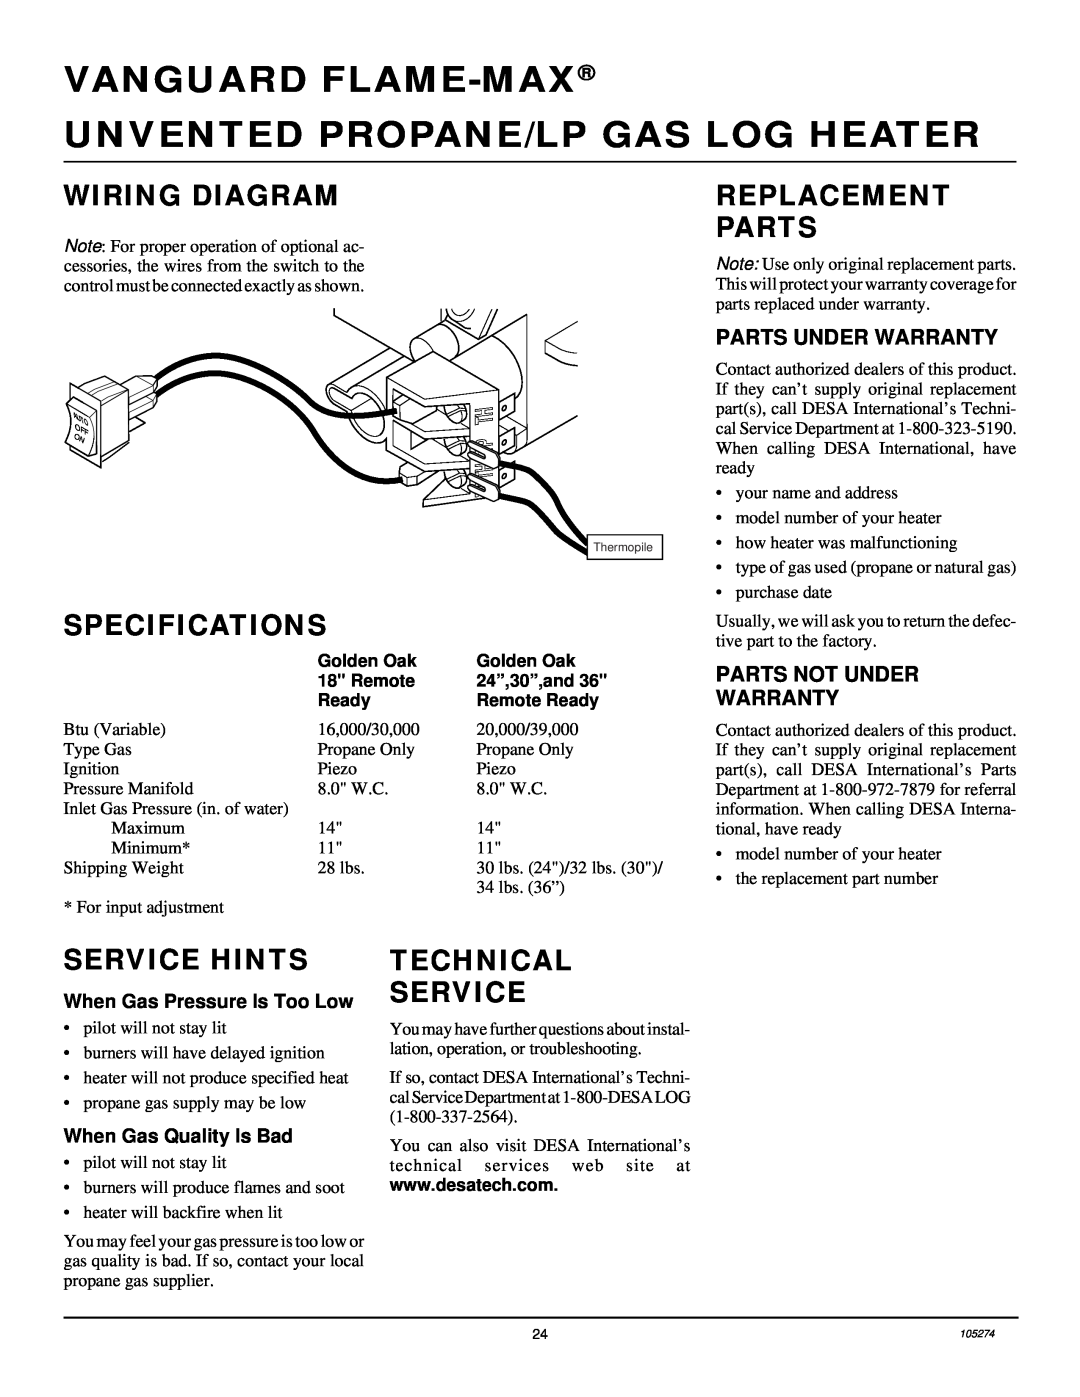 Vanguard Heating UNVENTED (VENT-FREE) PROPANE/LP GAS LOG HEATER Wiring Diagram, Specifications, Replacement Parts 